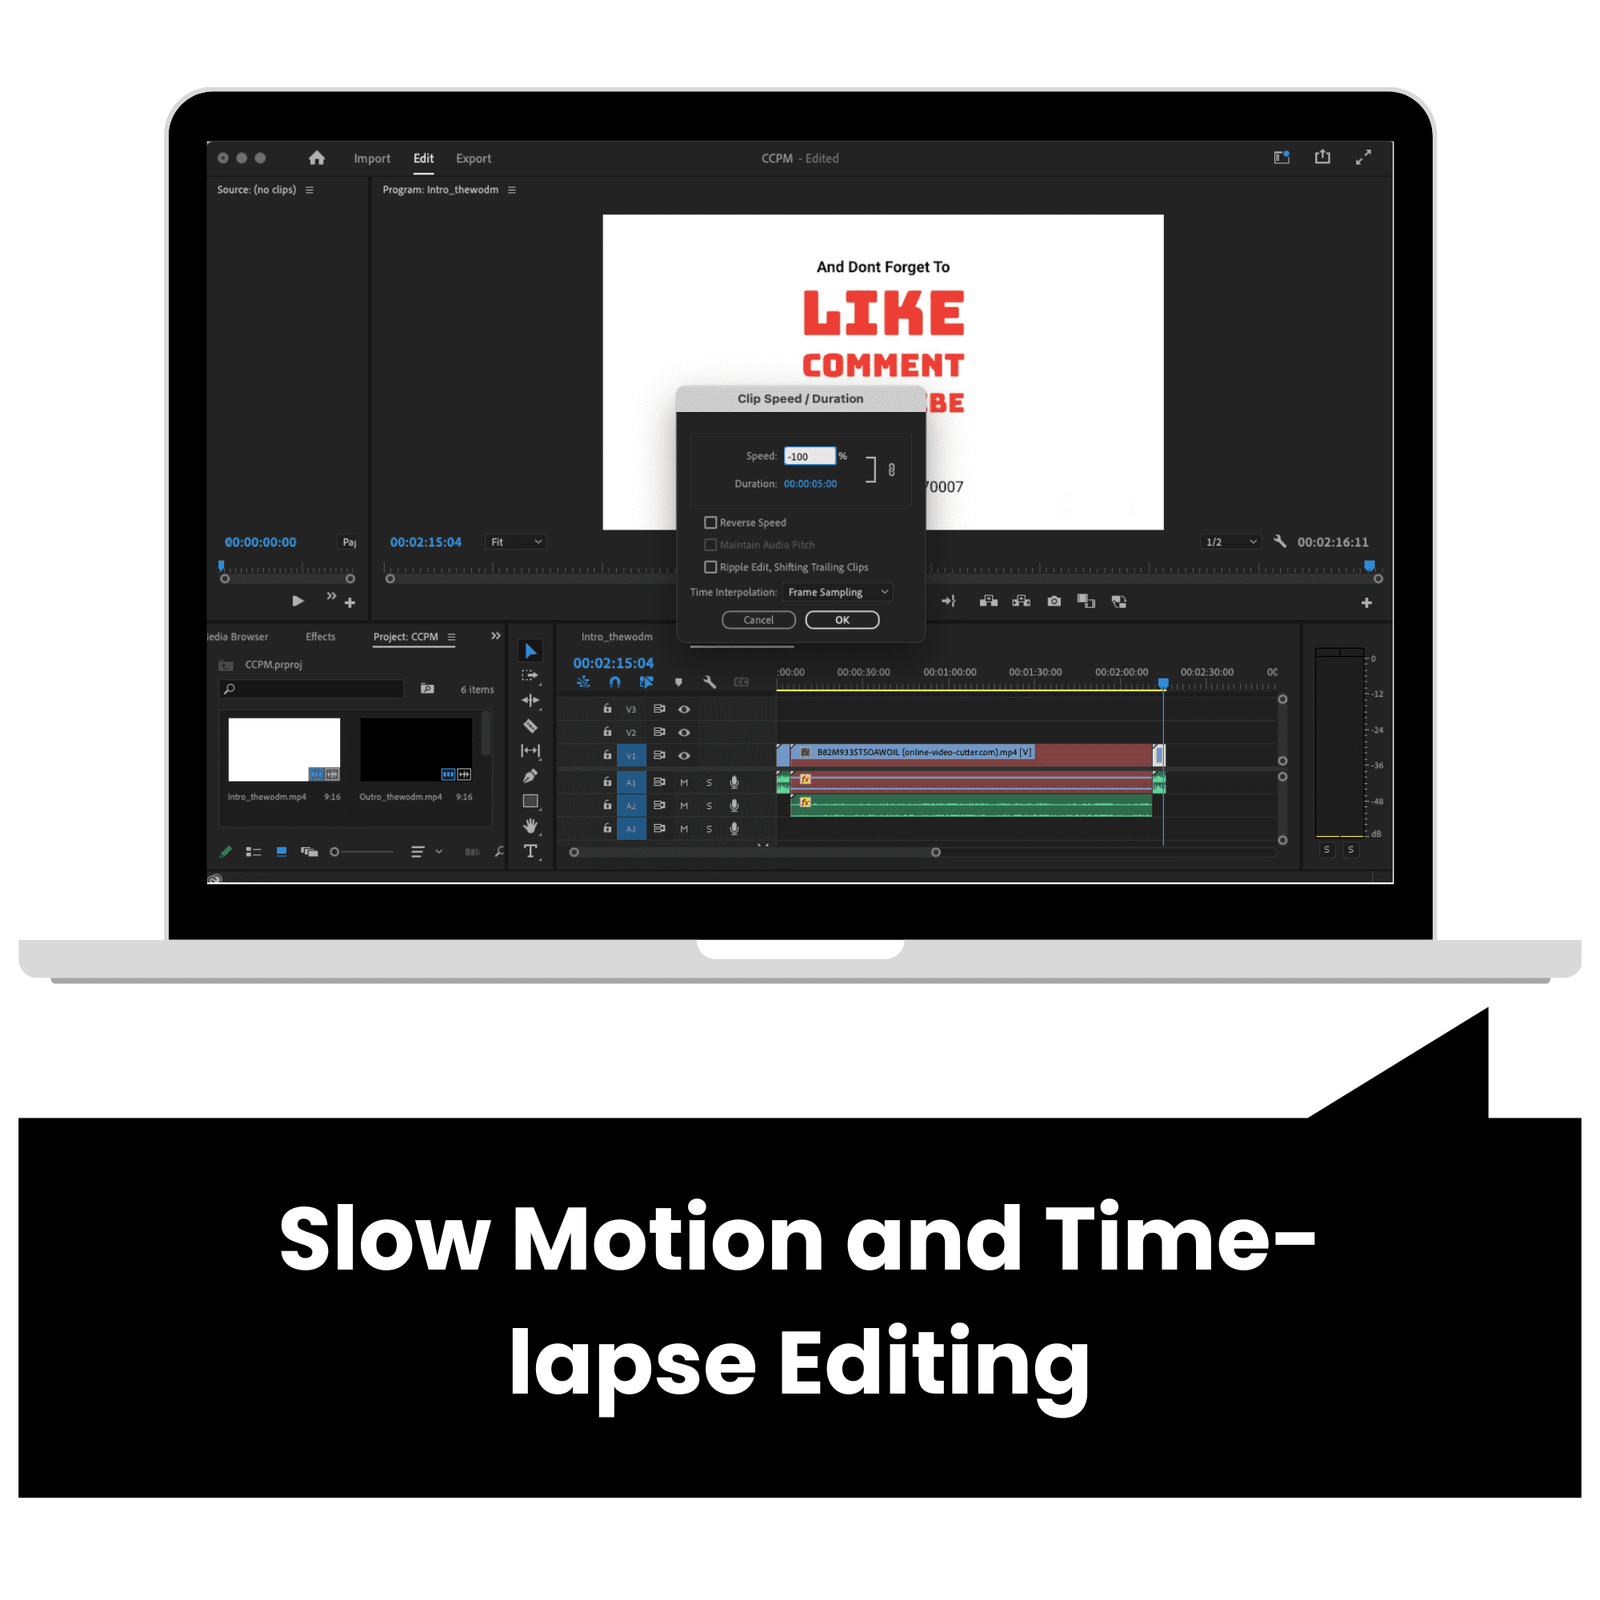 Slow Motion and Time-lapse Editing